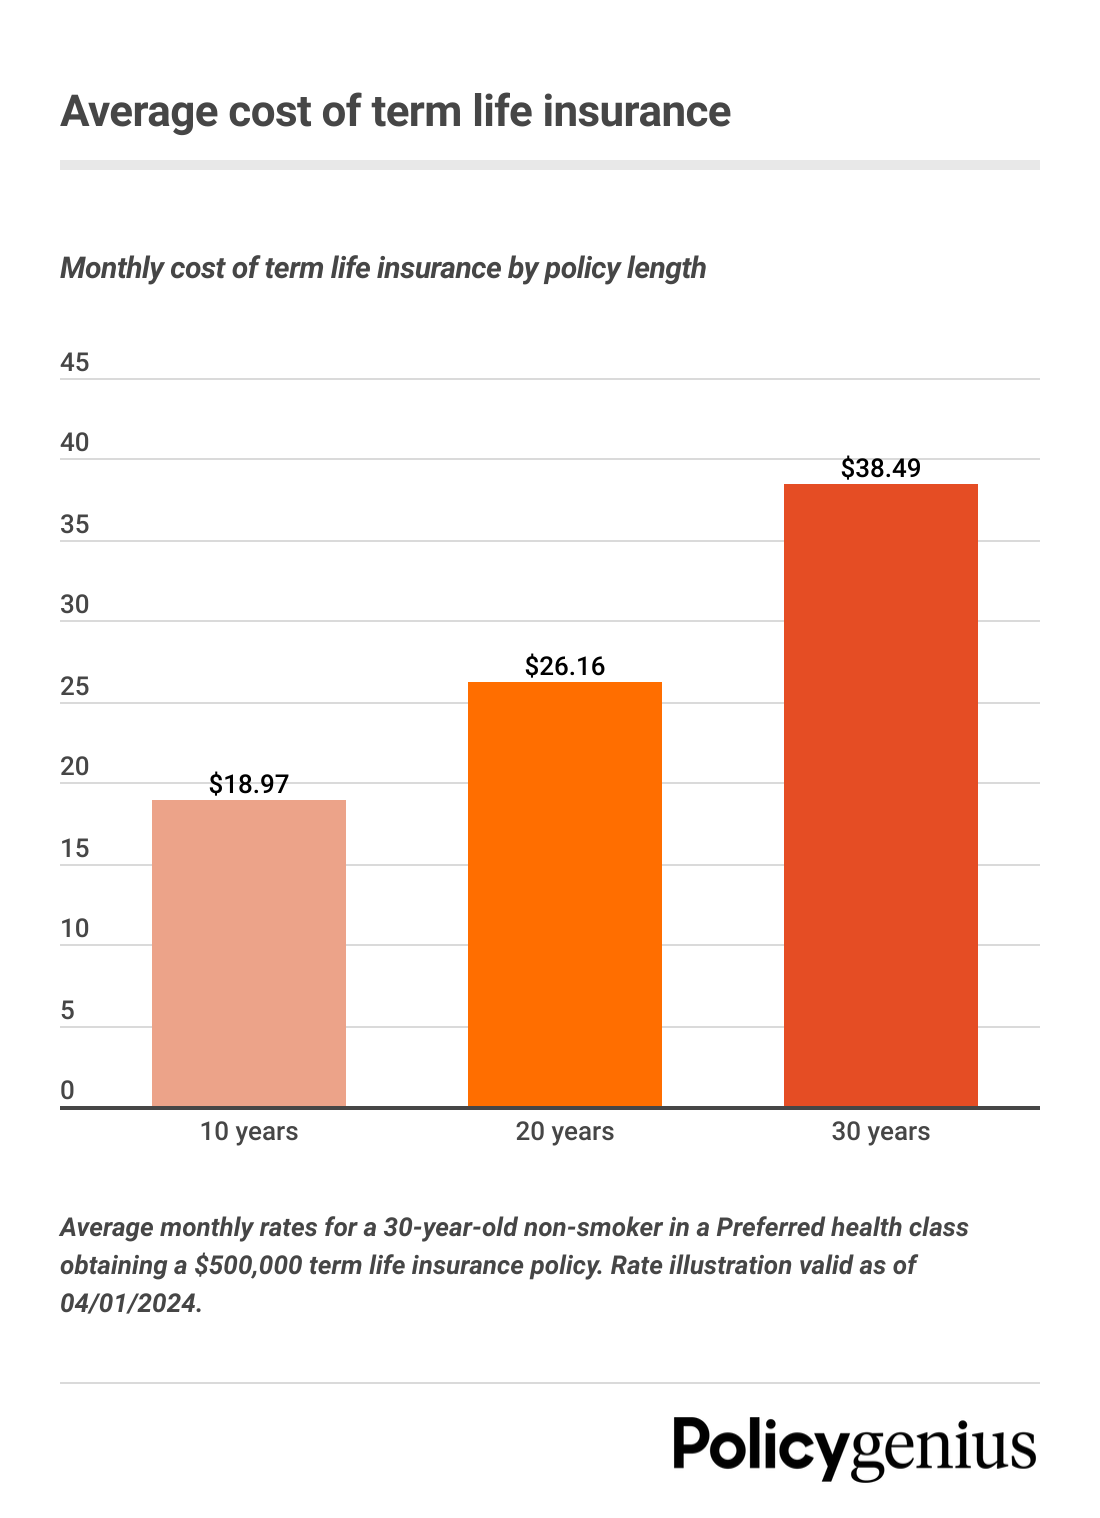 Average cost of term life insurance based on policies offered through Policygenius as of April of 2024.